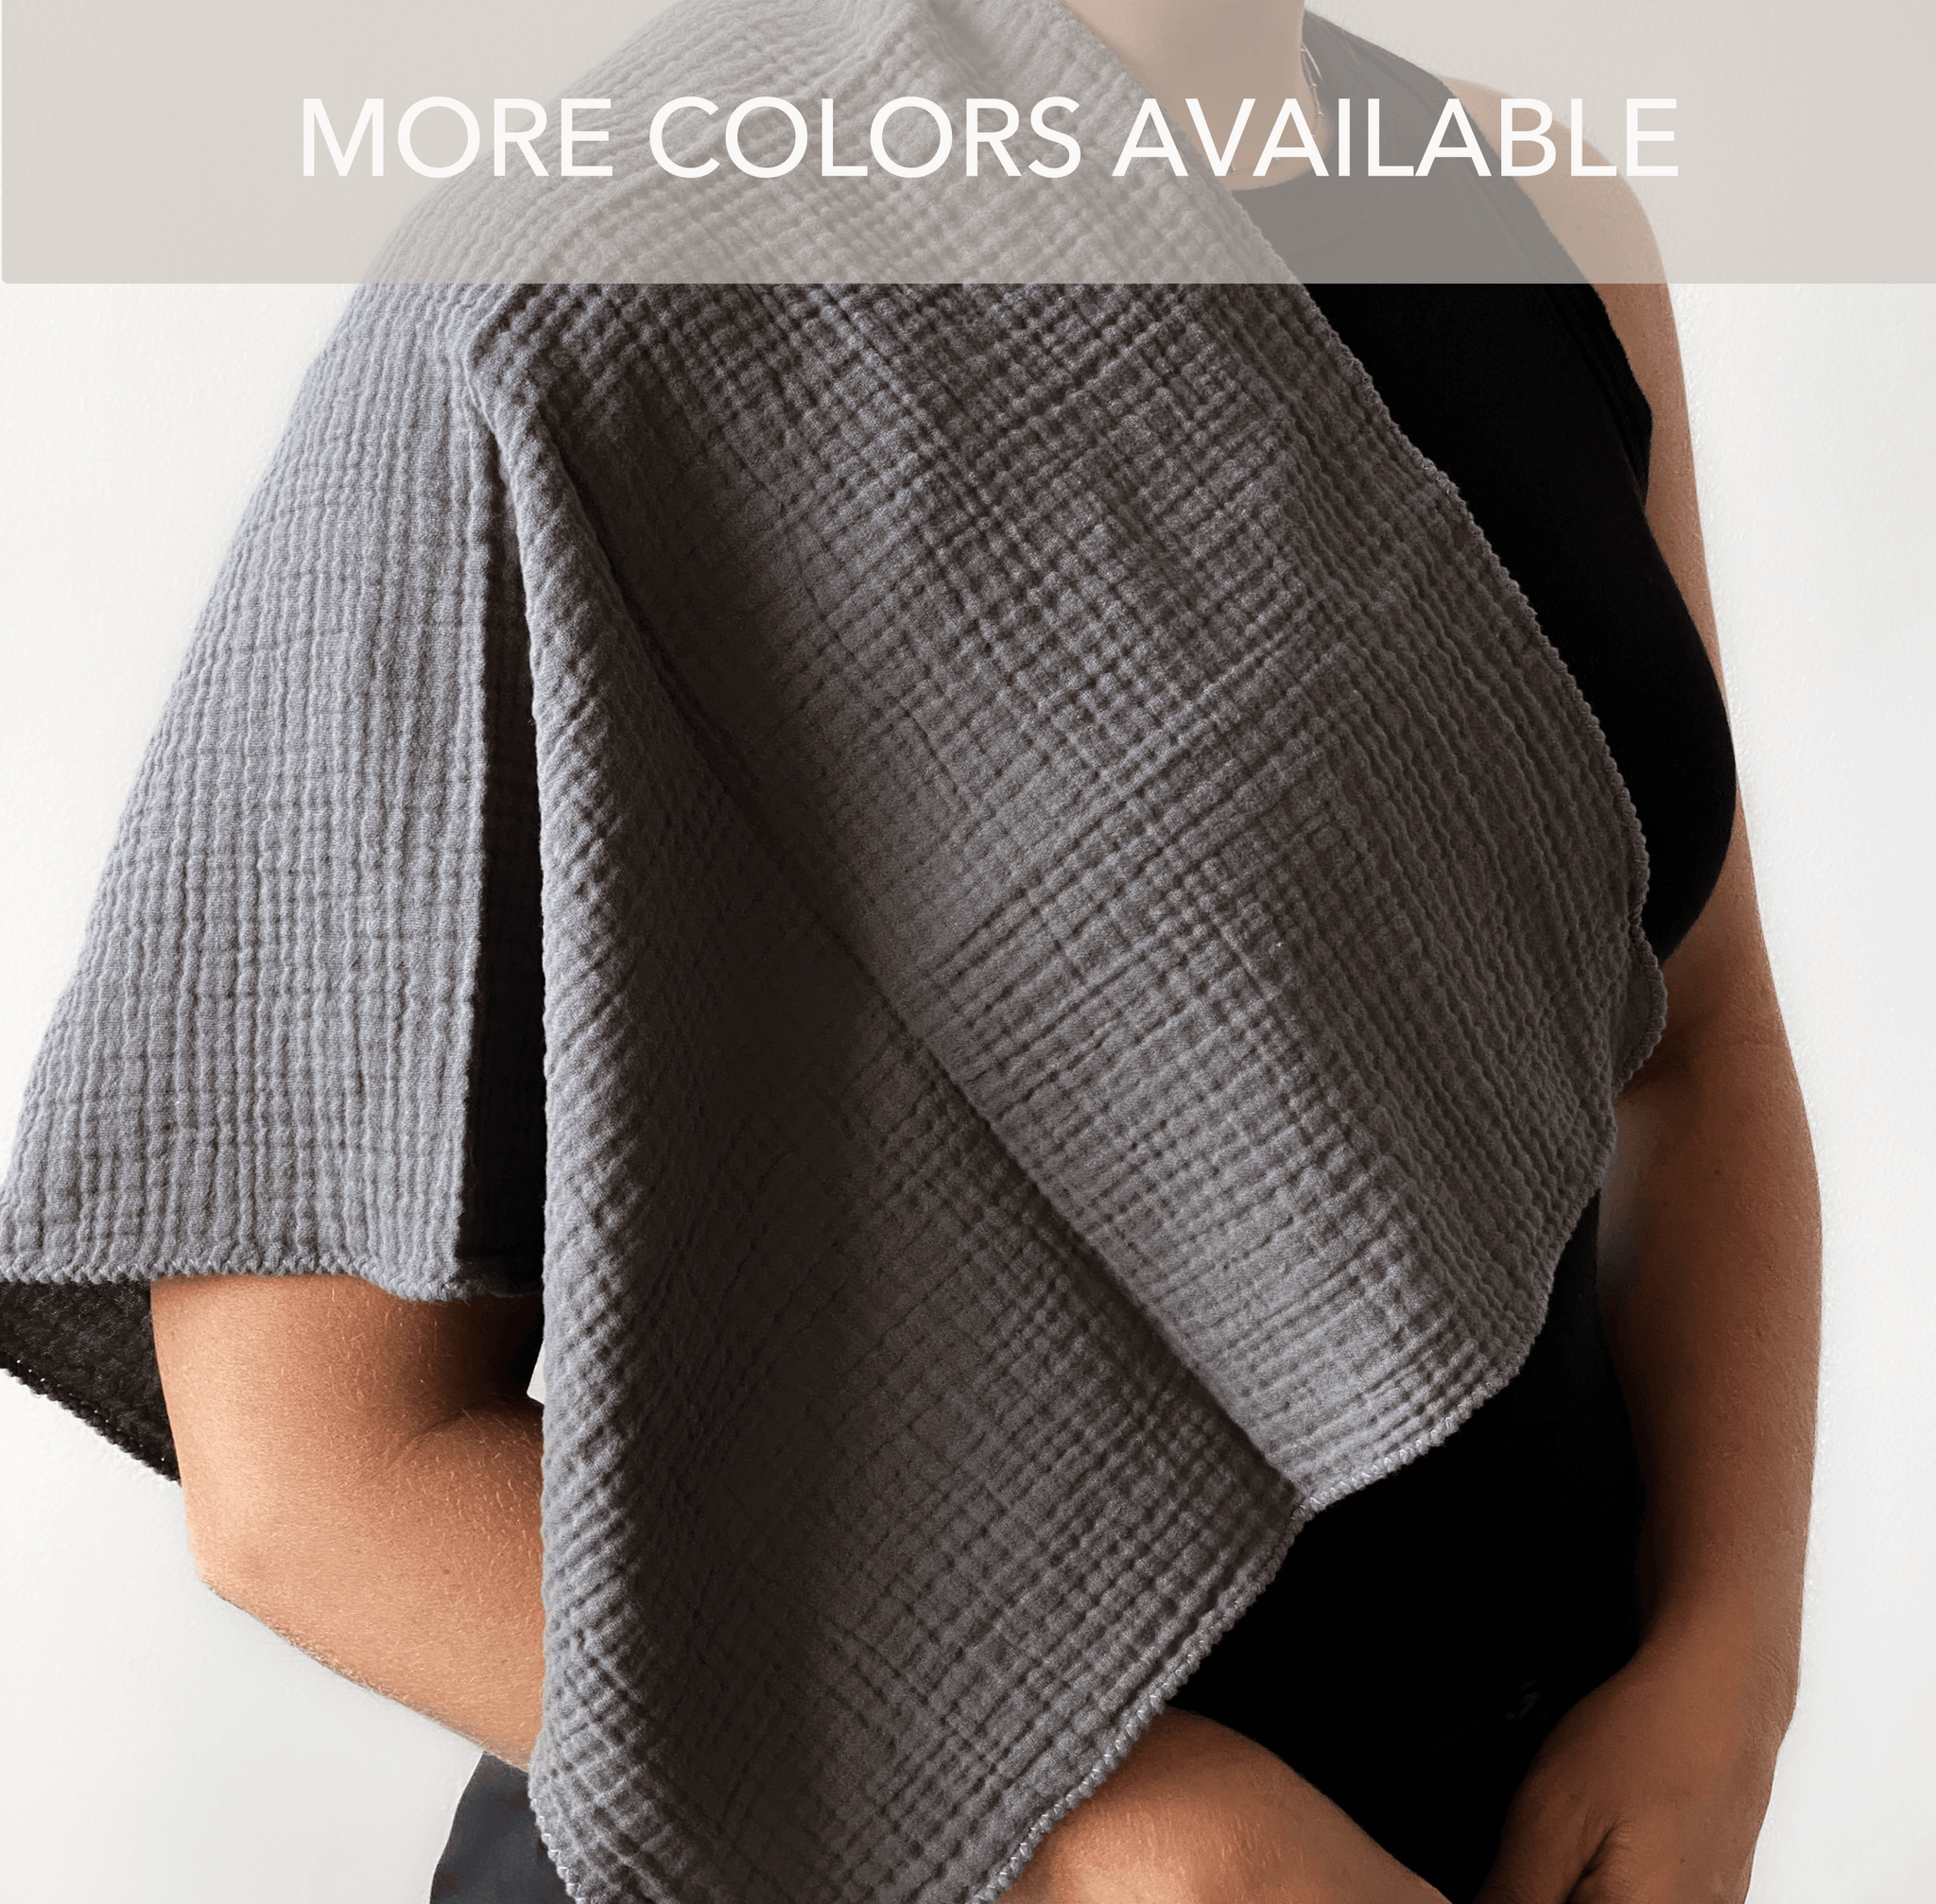 Lightweight Burp Cloth - Shoulder Towel - MORE COLORS AVAILABLE - Charley Charles